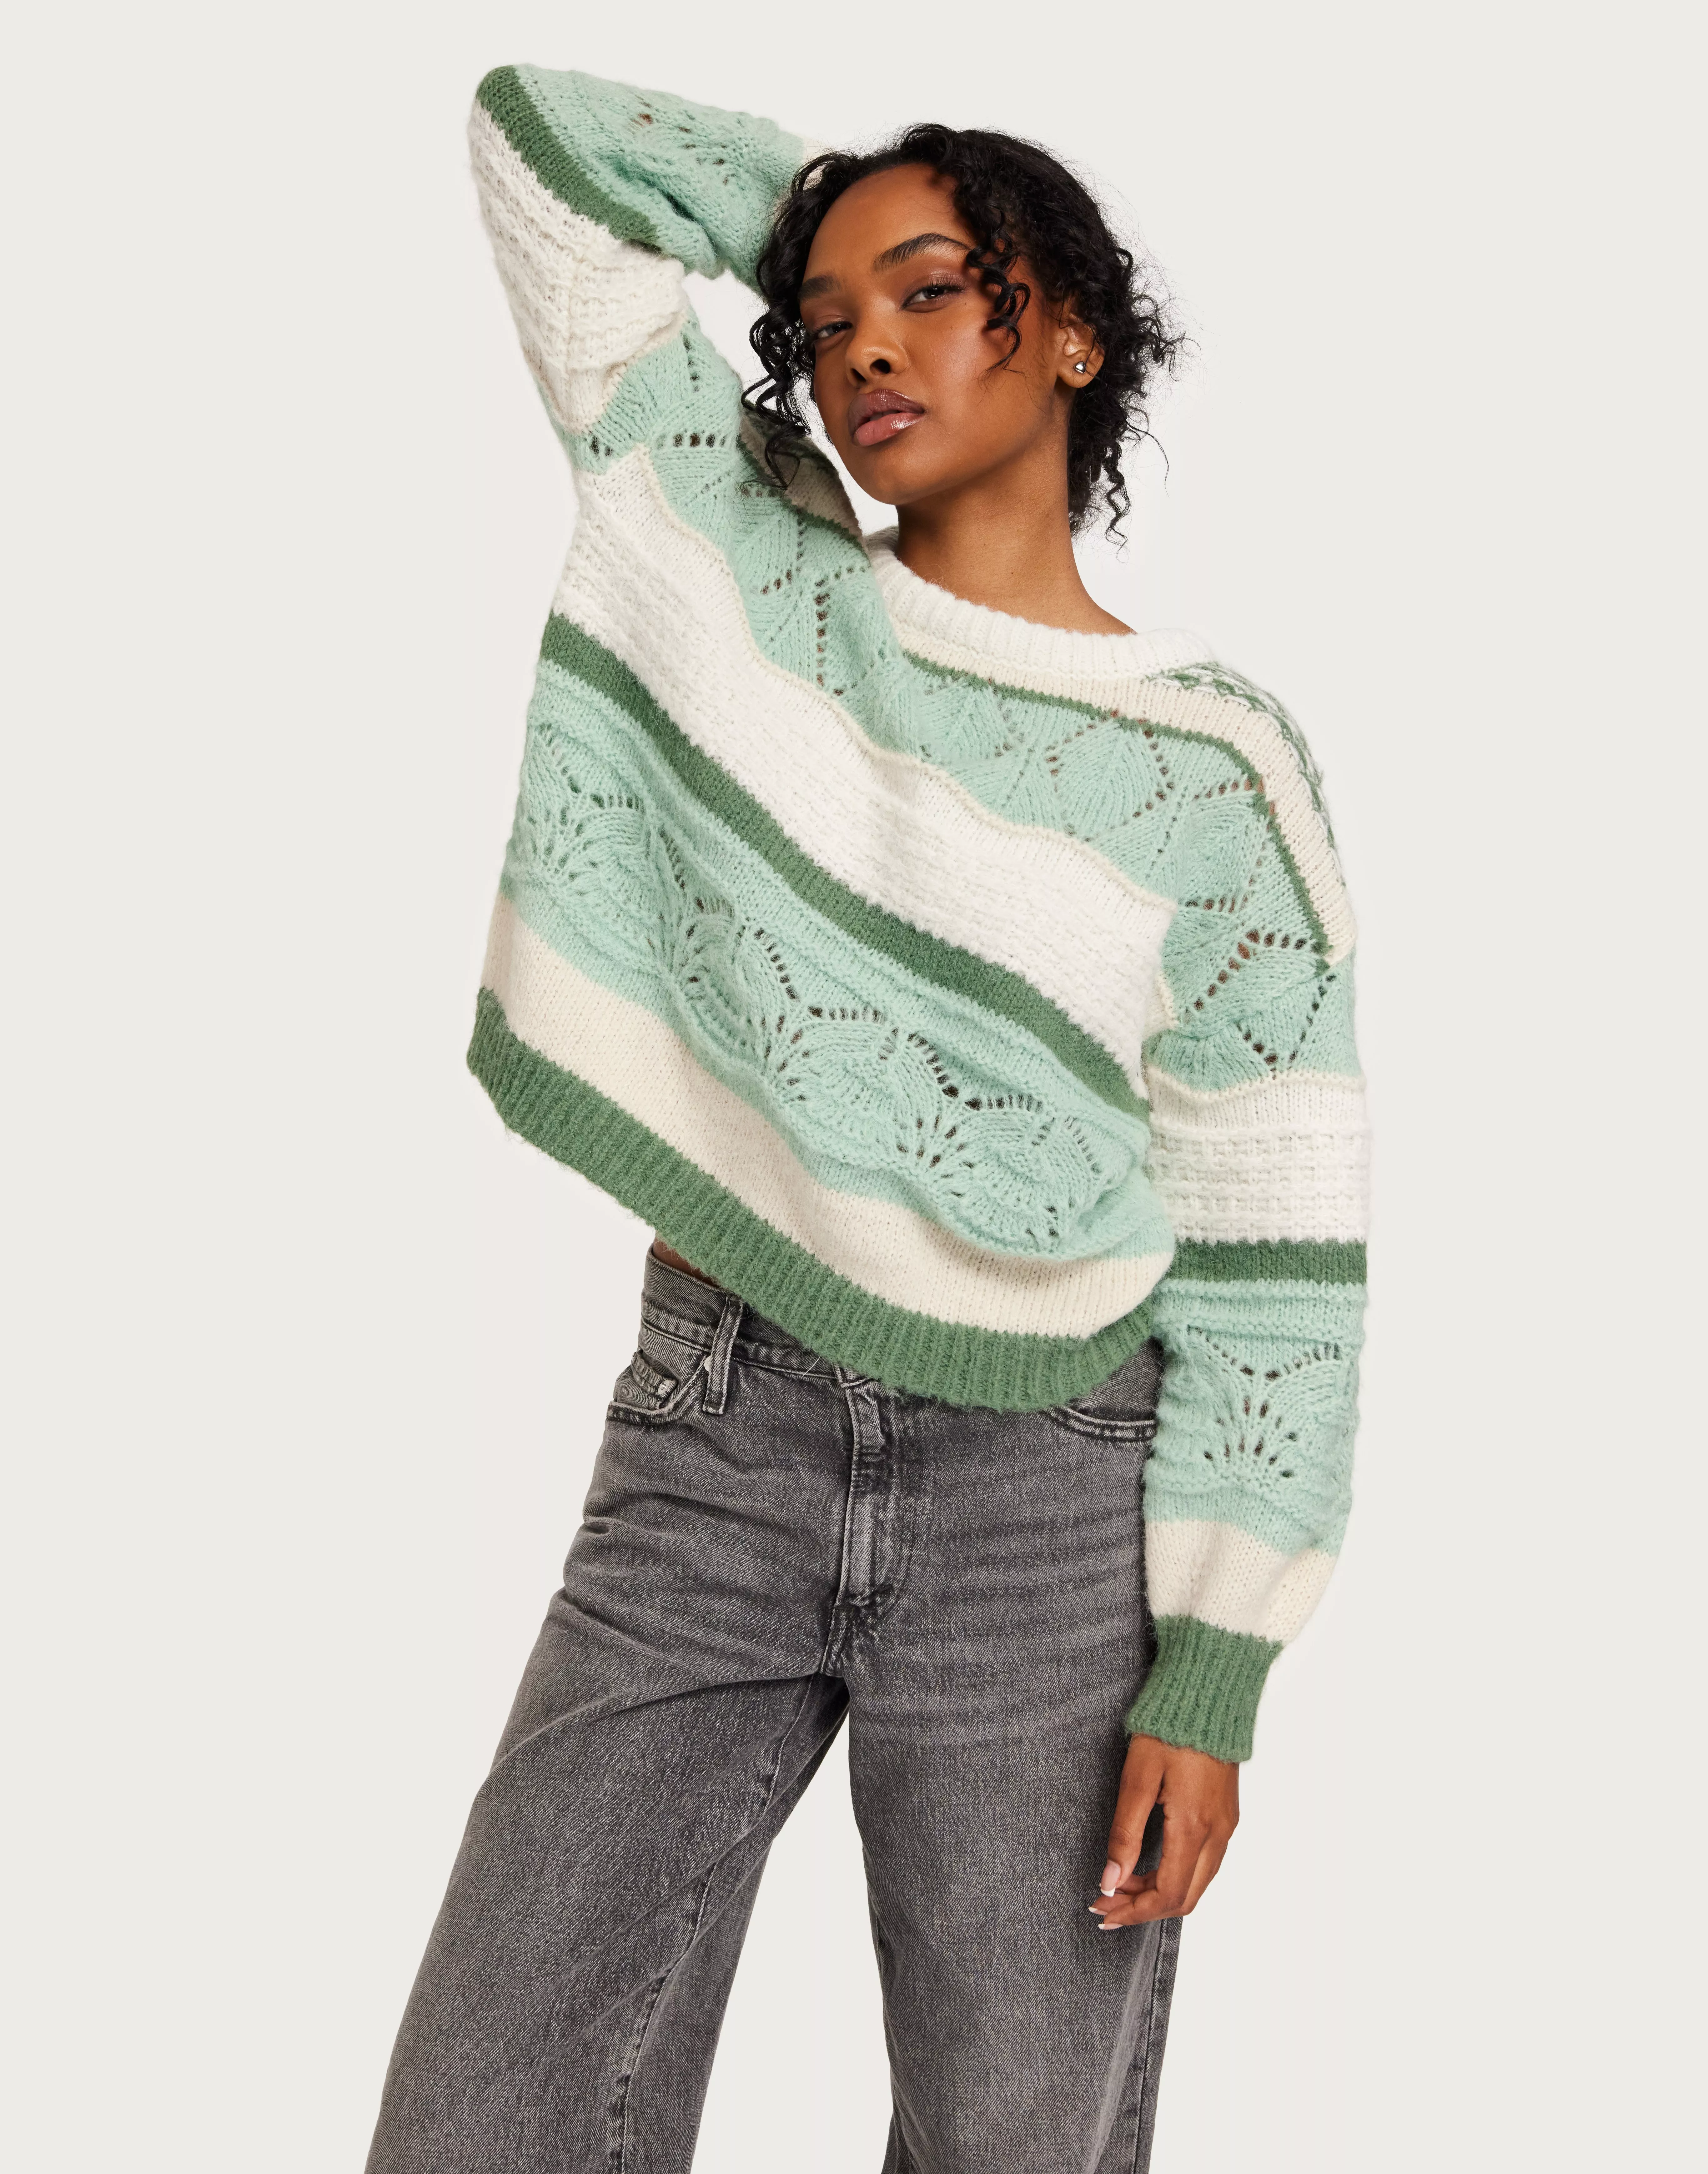 Dancer/Sea Green LIFE Buy NOOS Silt - Spray/Bich ONLADINA PULLOVER L/S Cloud Only KNT